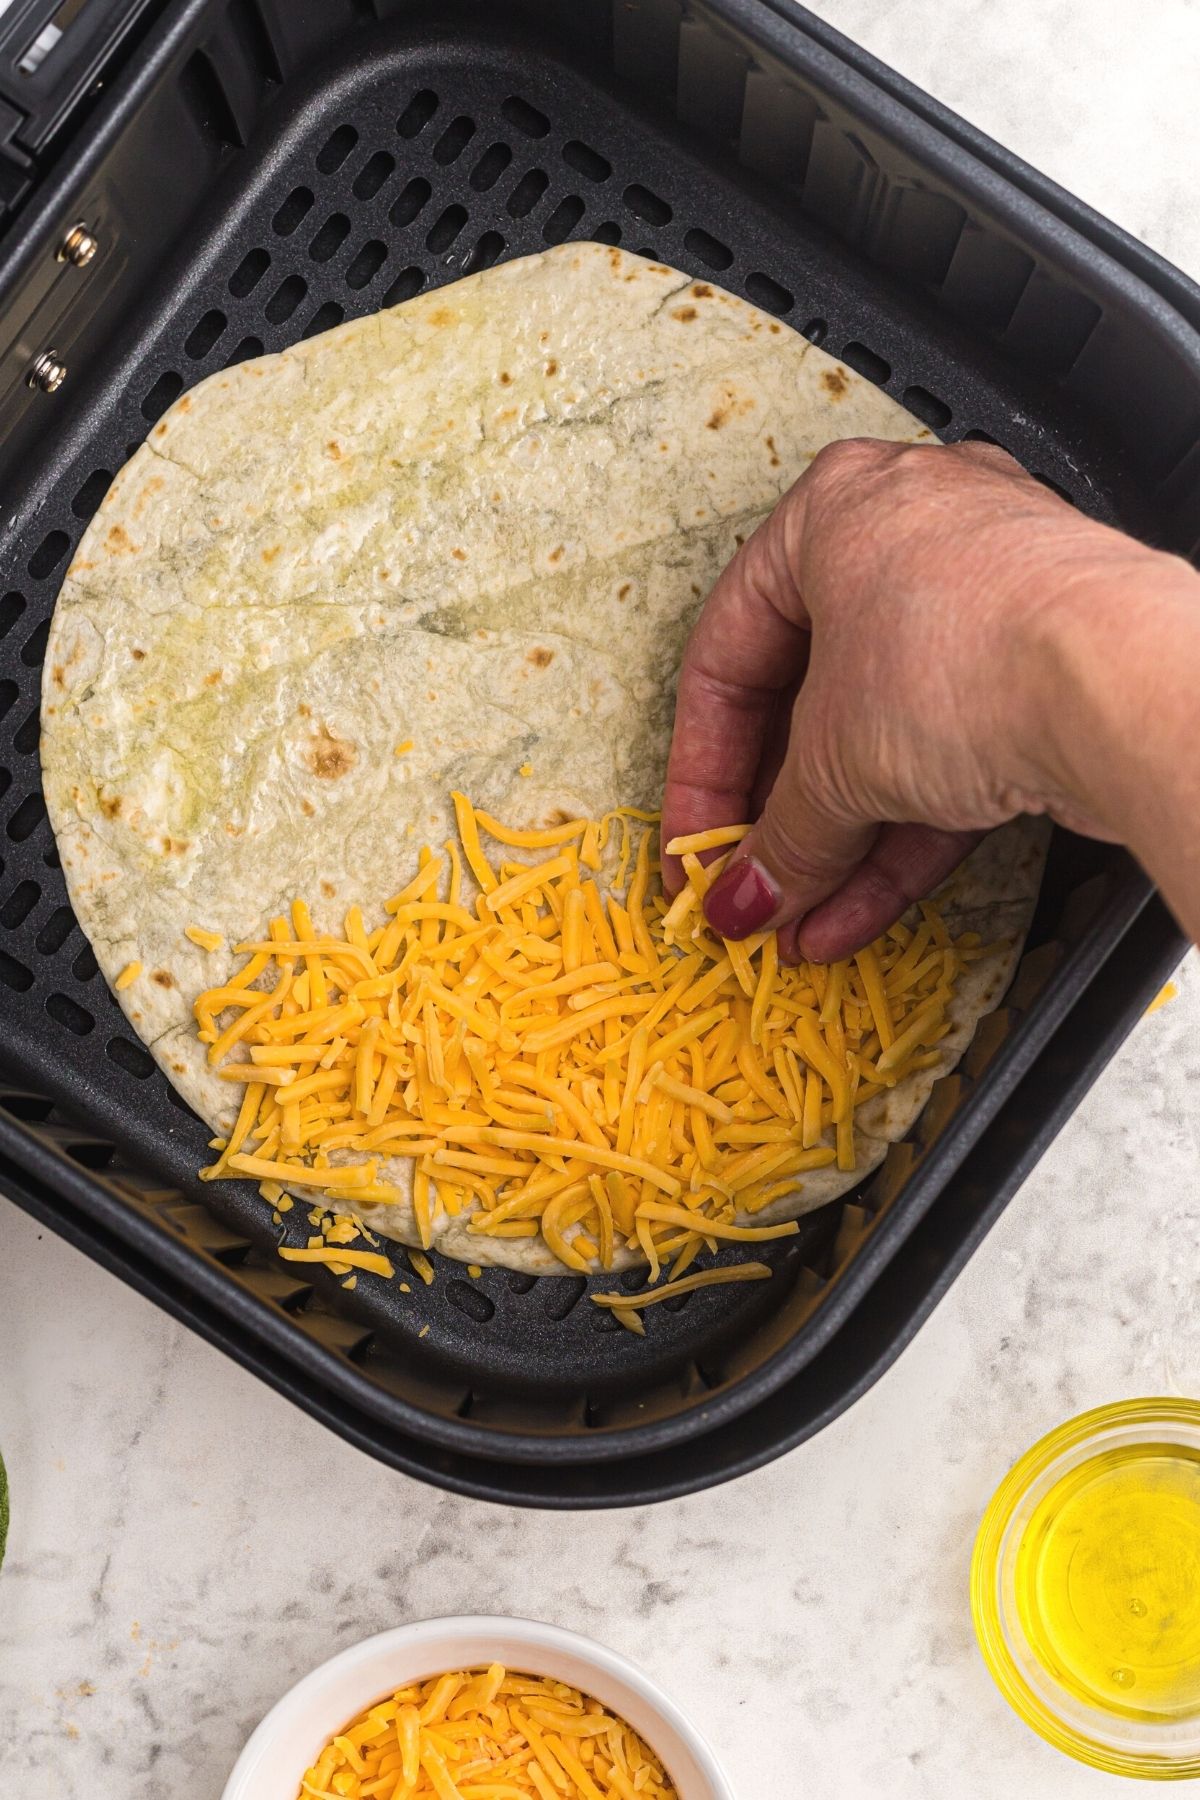 Sprinkling tortillas with cheddar cheese in the air fryer basket